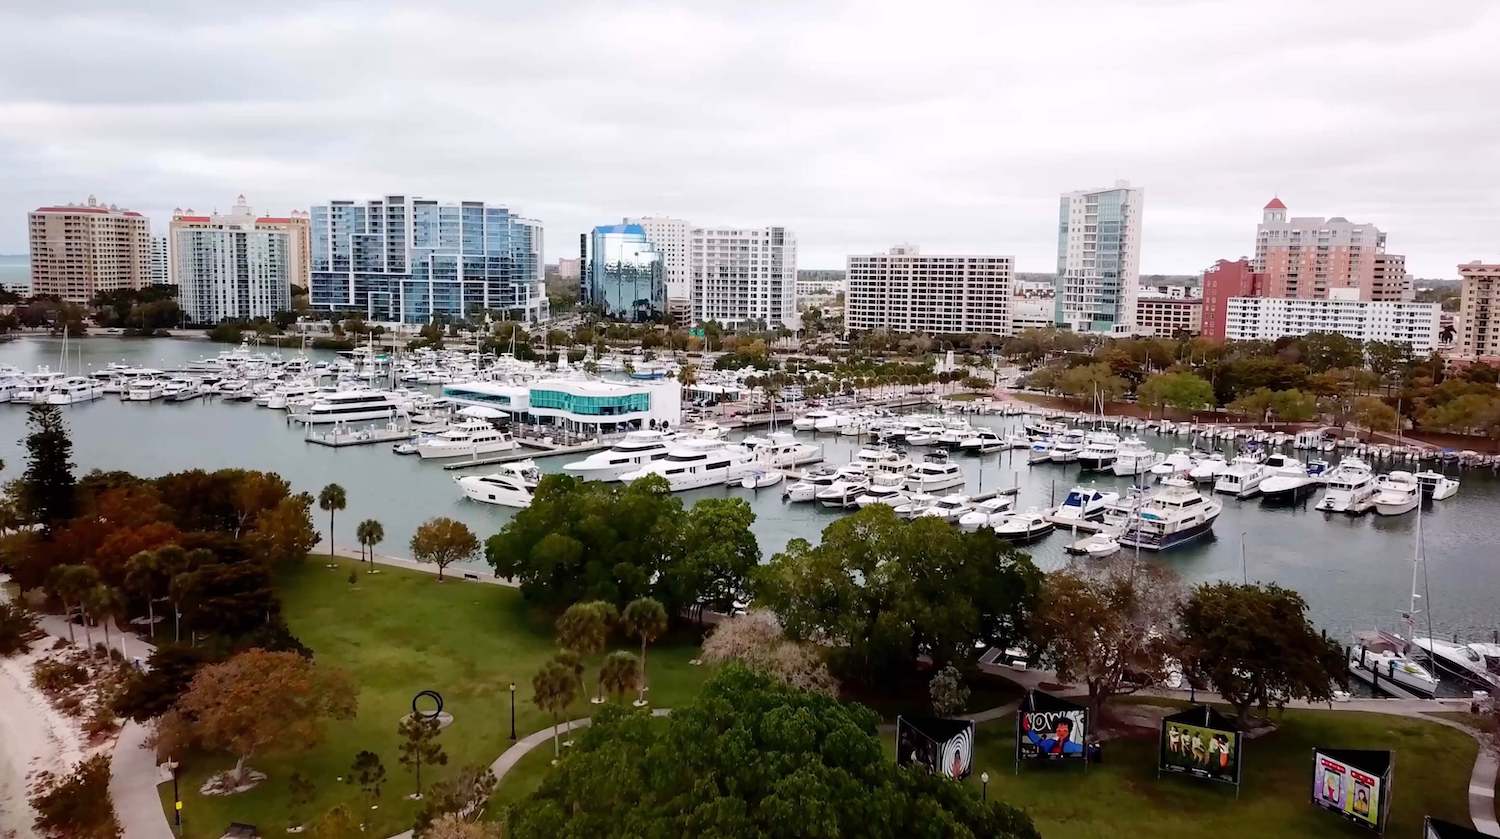 According to the Today Show, Sarasota is ranked as the second most booming city.